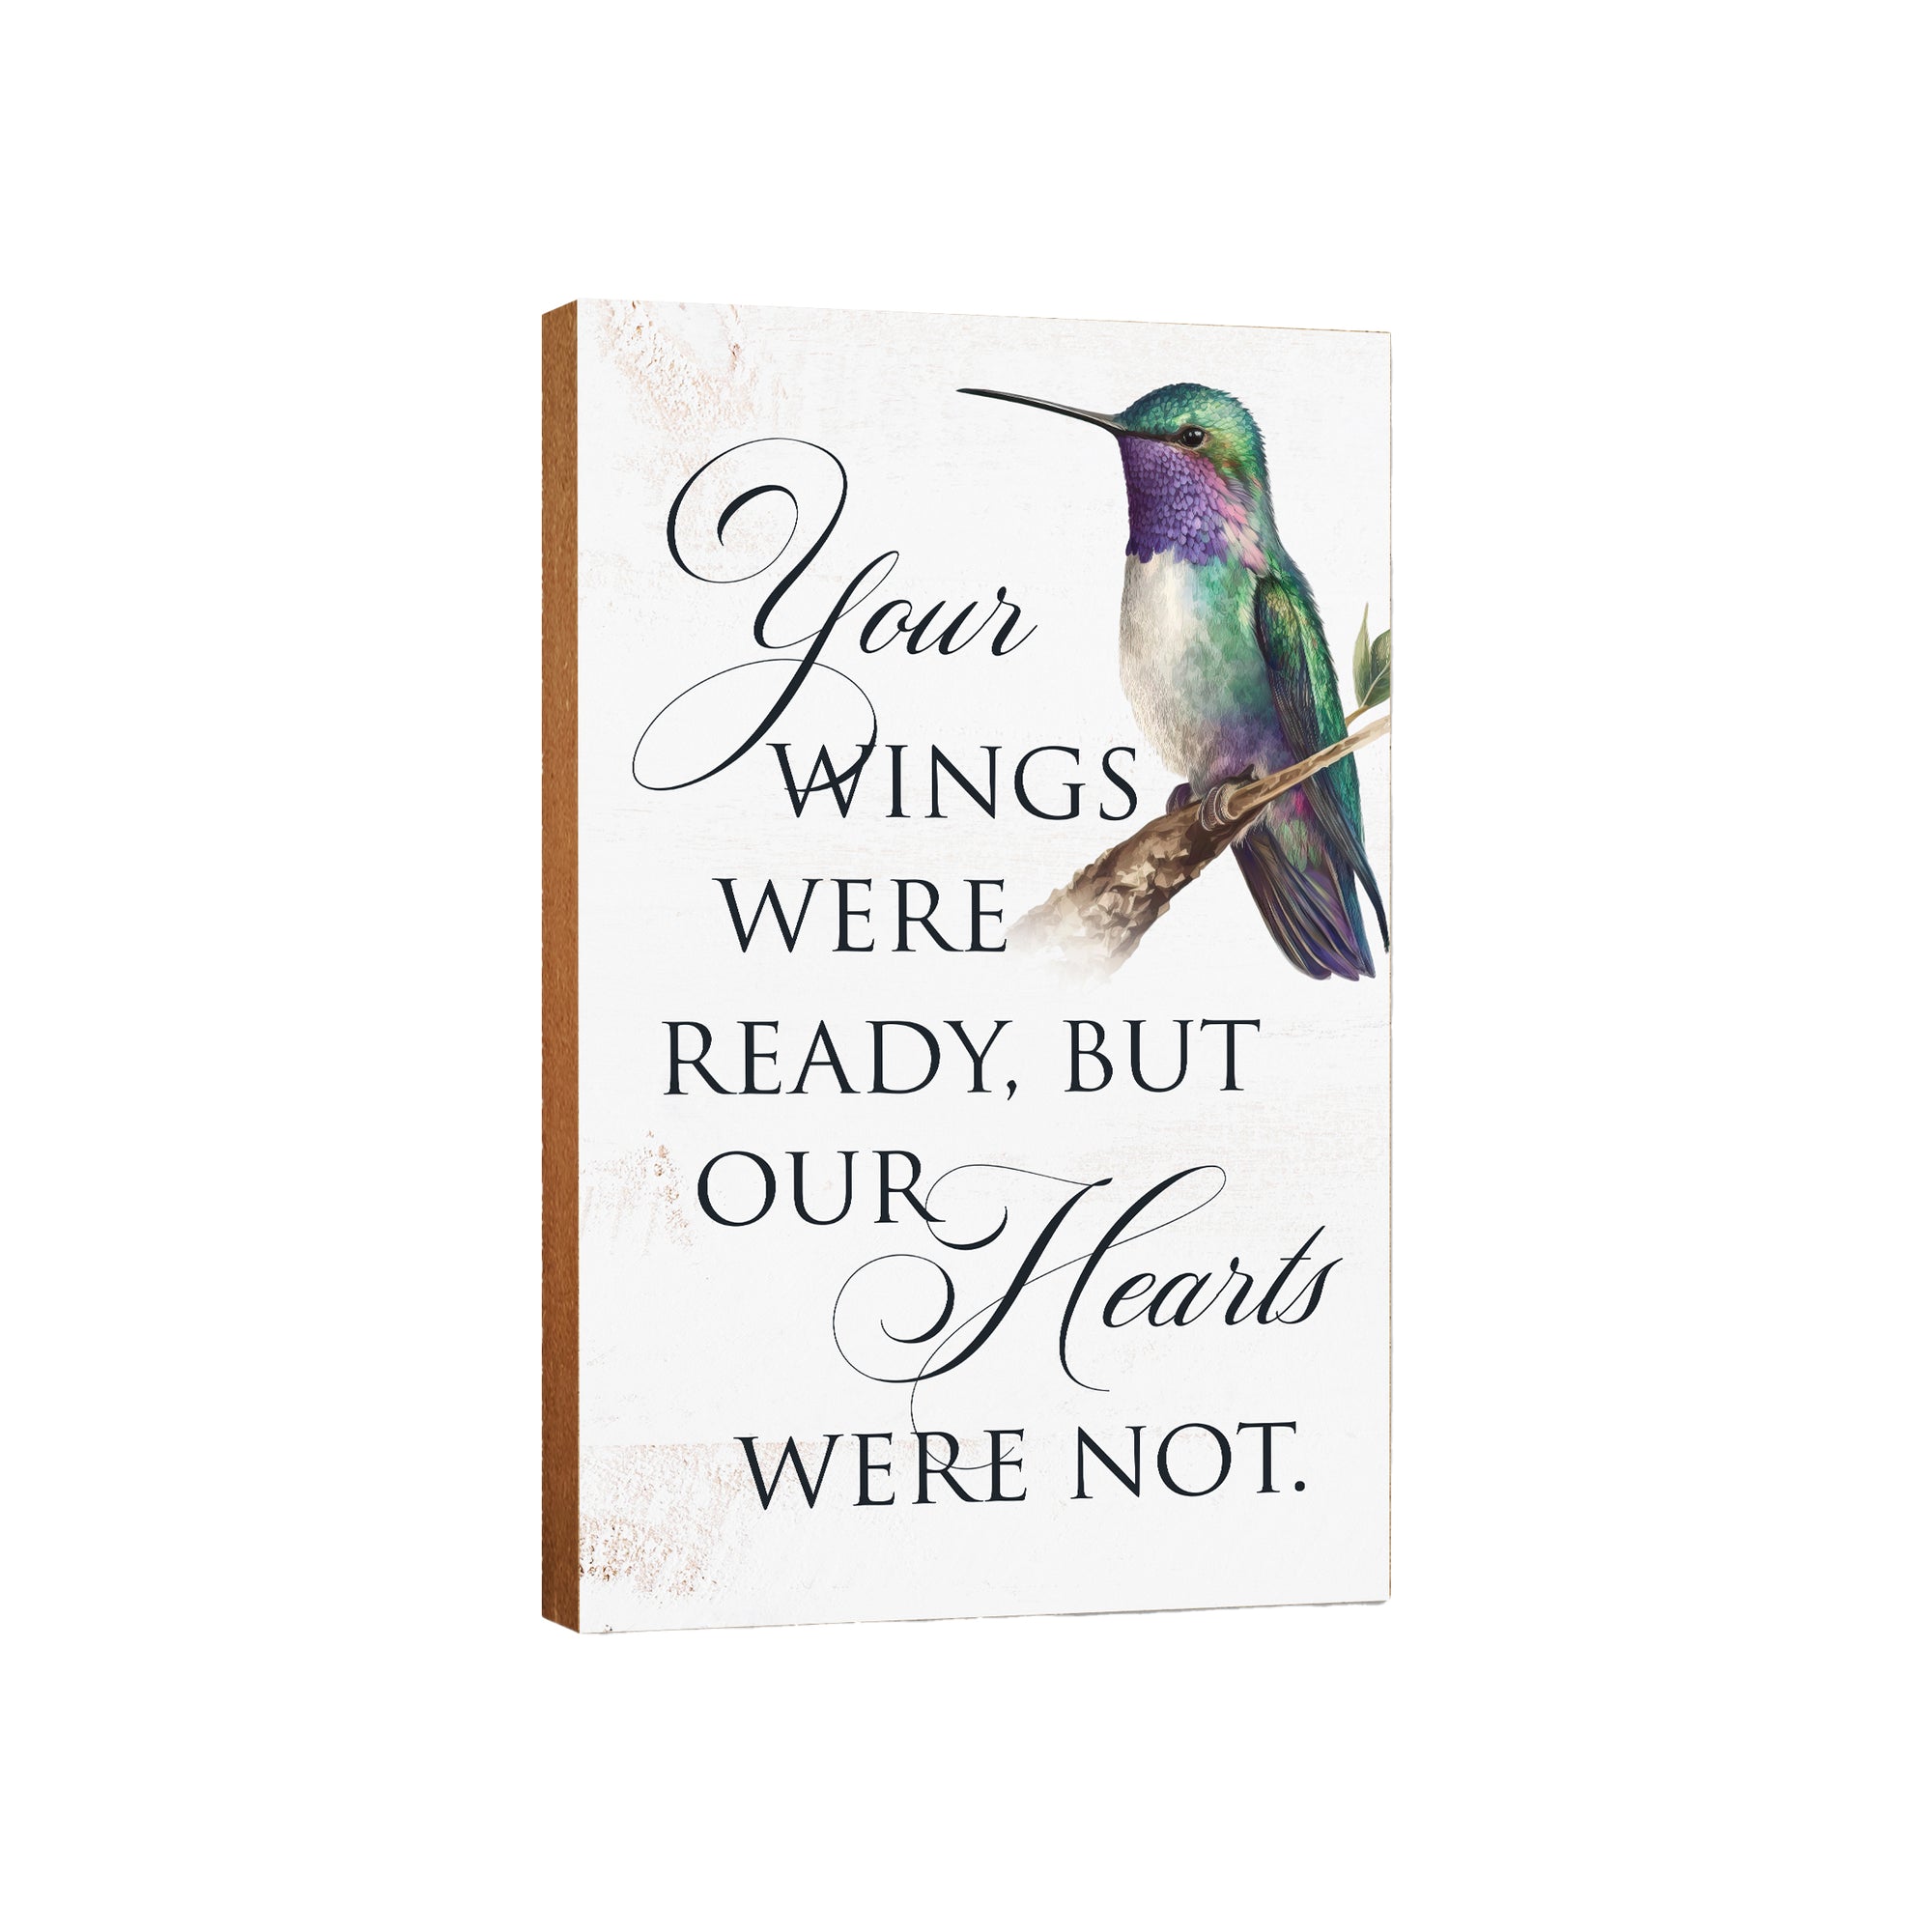 LifeSong Milestones Wooden Memorial Hummingbird Wall Plaque for Loss of Loved One